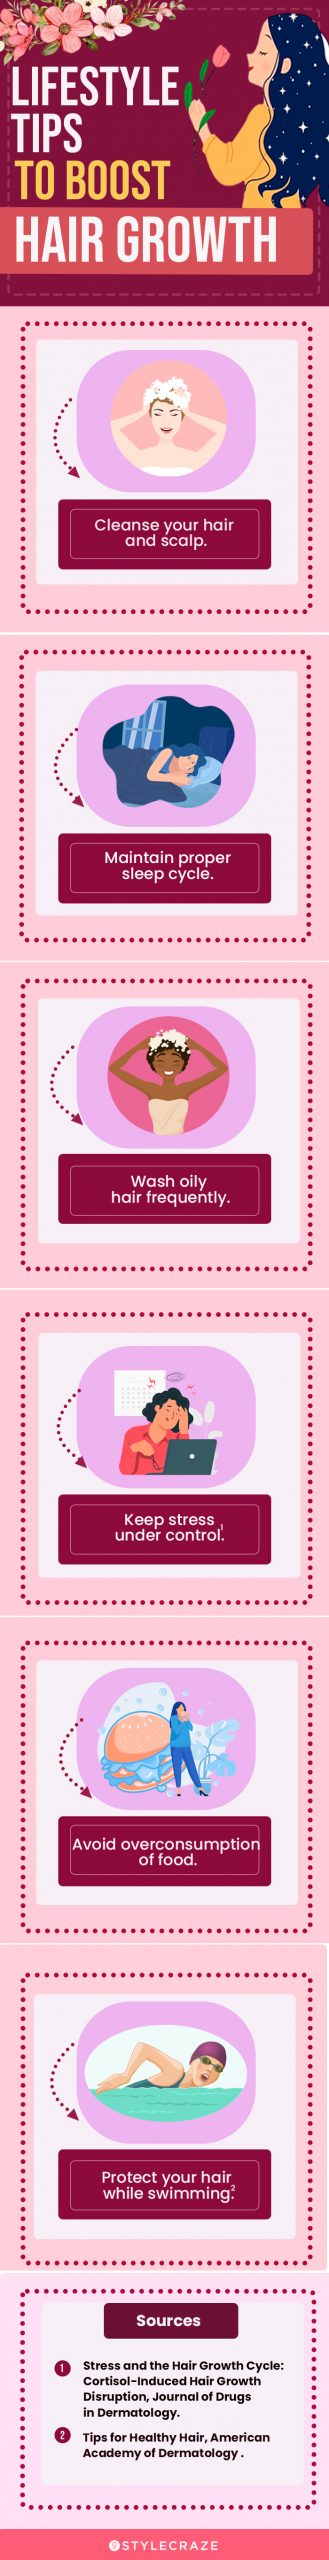 life style tips to boost hair growth (infographic)